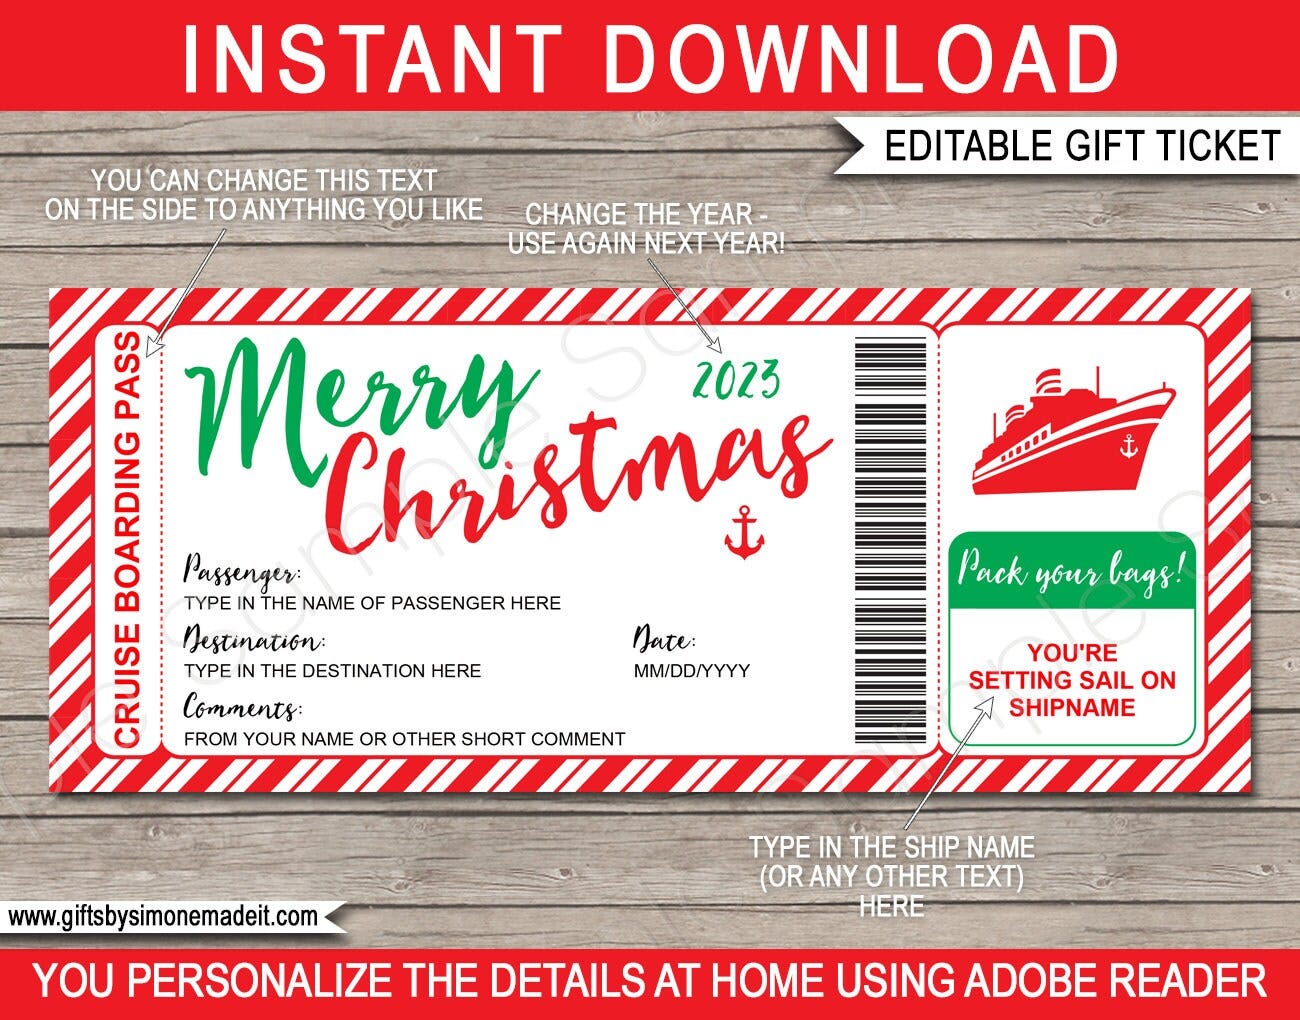 Christmas Cruise Ticket Boarding Pass Gift Template - Surprise Cruise Ship Reveal - Printable Gift Voucher - INSTANT DOWNLOAD text EDITABLE